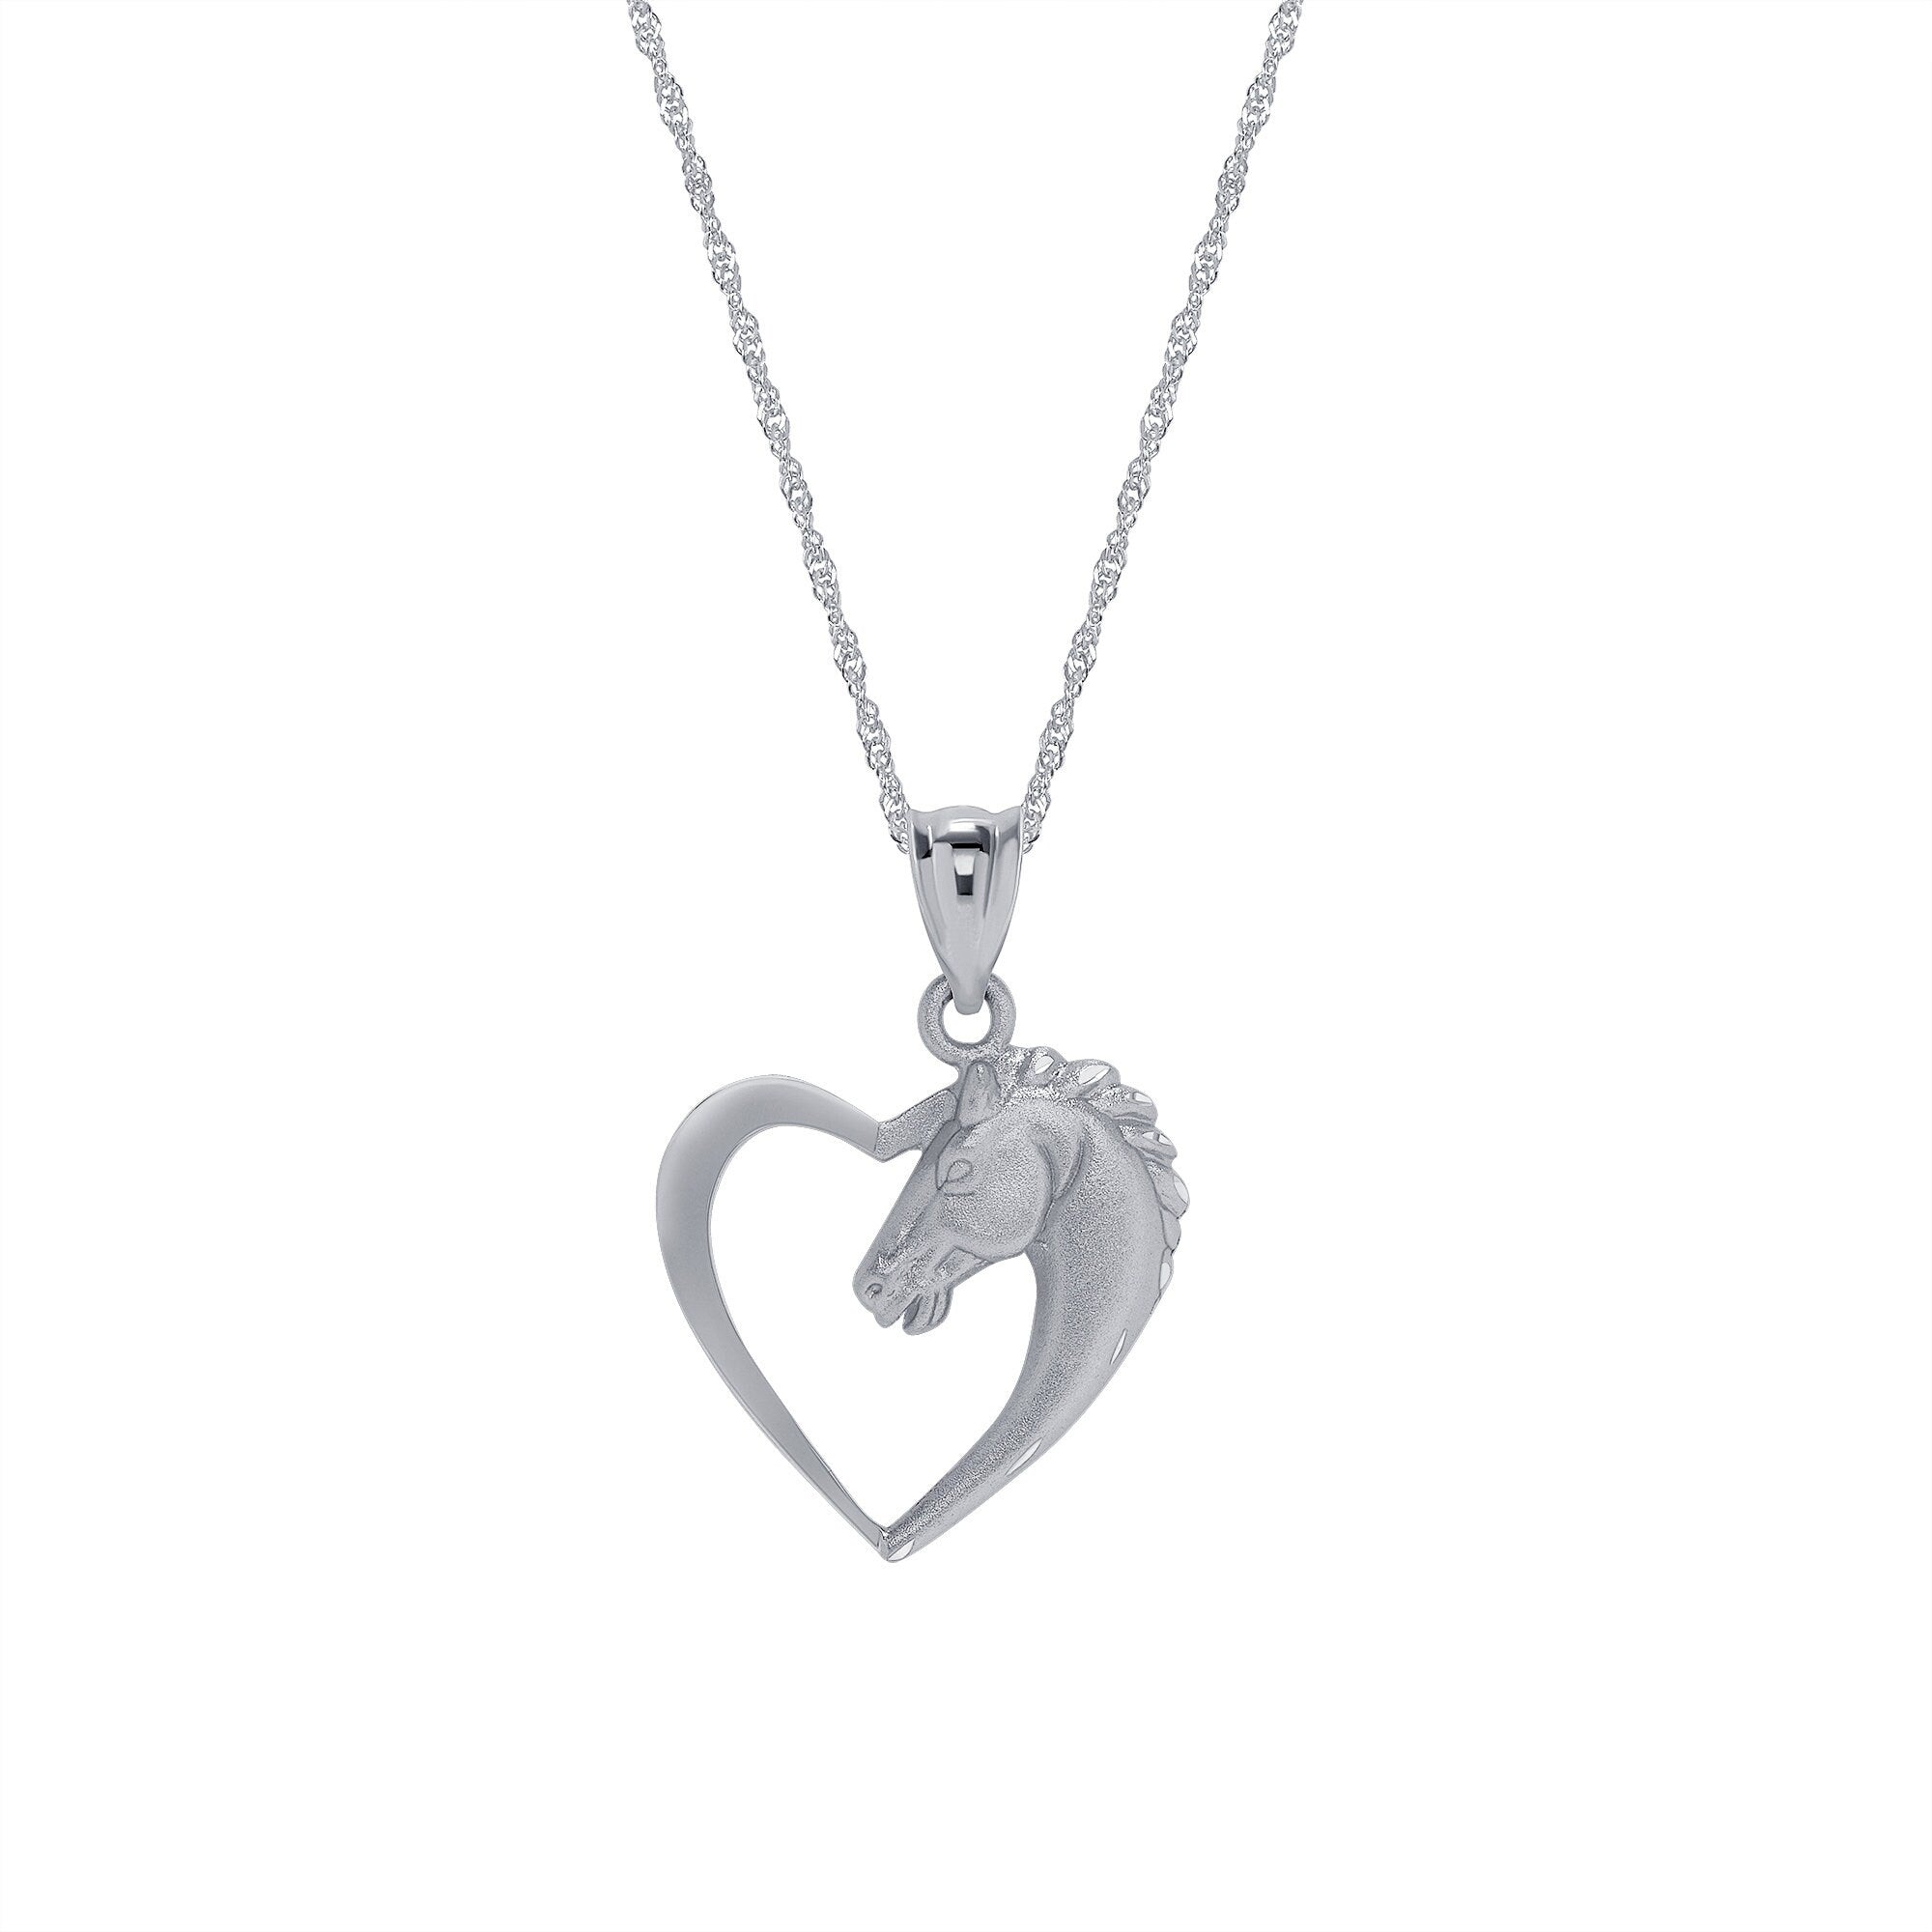 14k solid gold heart shape horse pendant on 18" chain